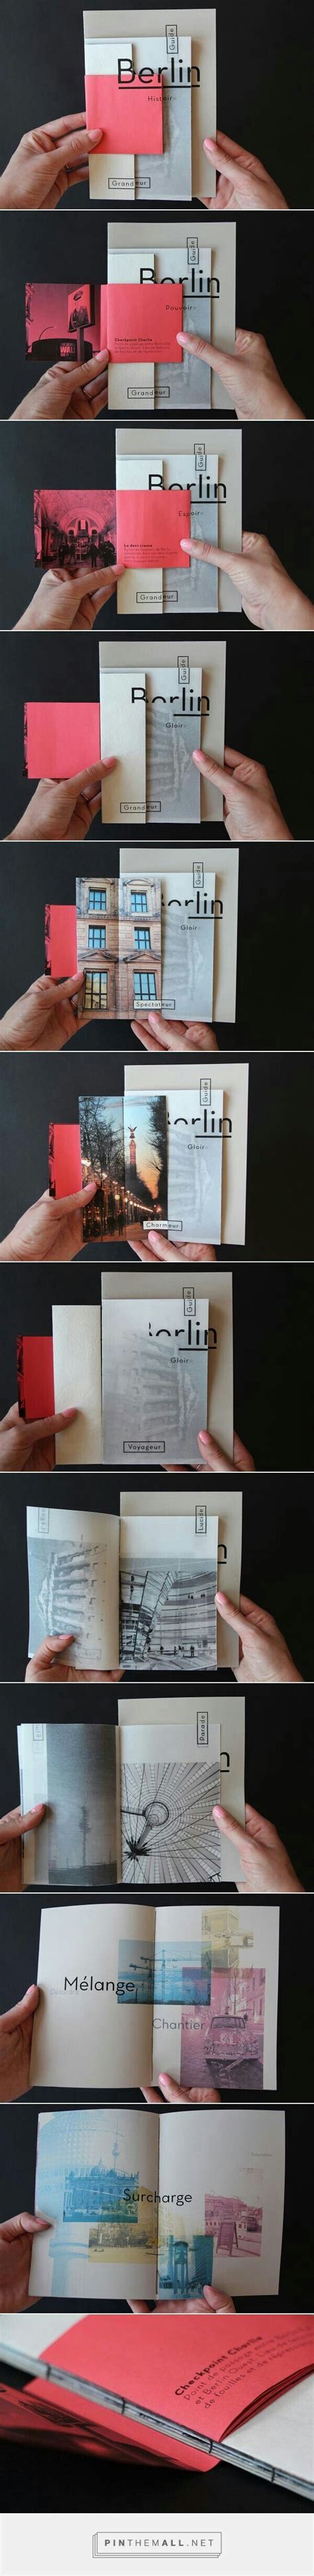 Pin On A Book By Its Cover Just Design Not Necessarily Content